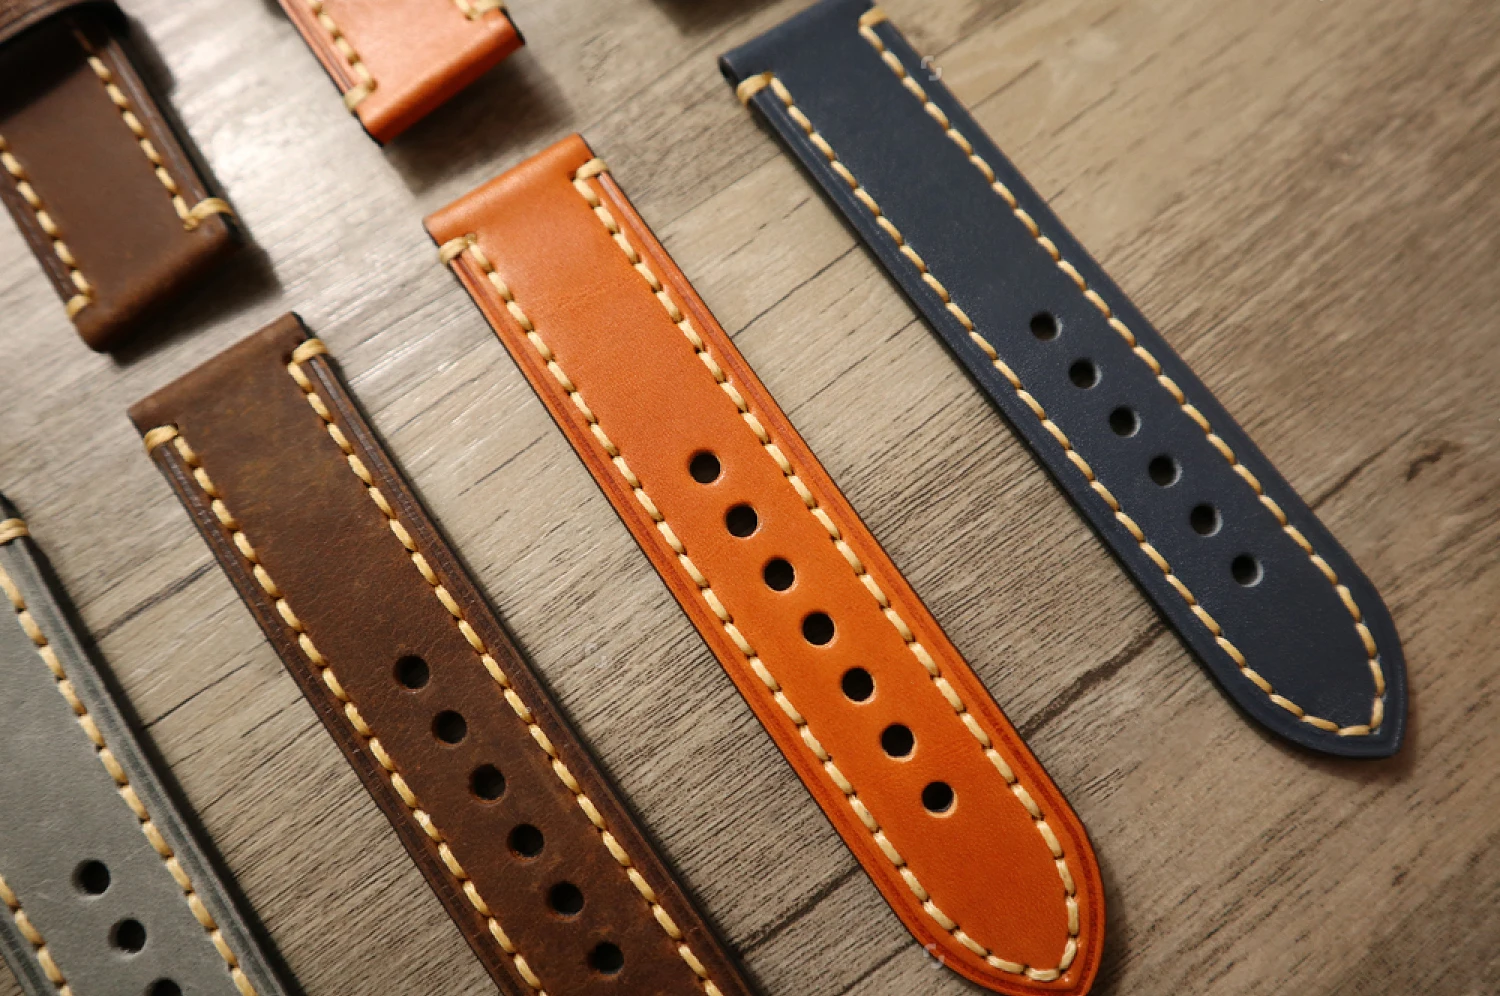 leather watch band strap compatible with all model GBD100BAR-4 GBD100-1A7 GBD200UU-9 GBA900UU-3A GBA900UU-5A  GBA900-1A GBA900-7 enlarge